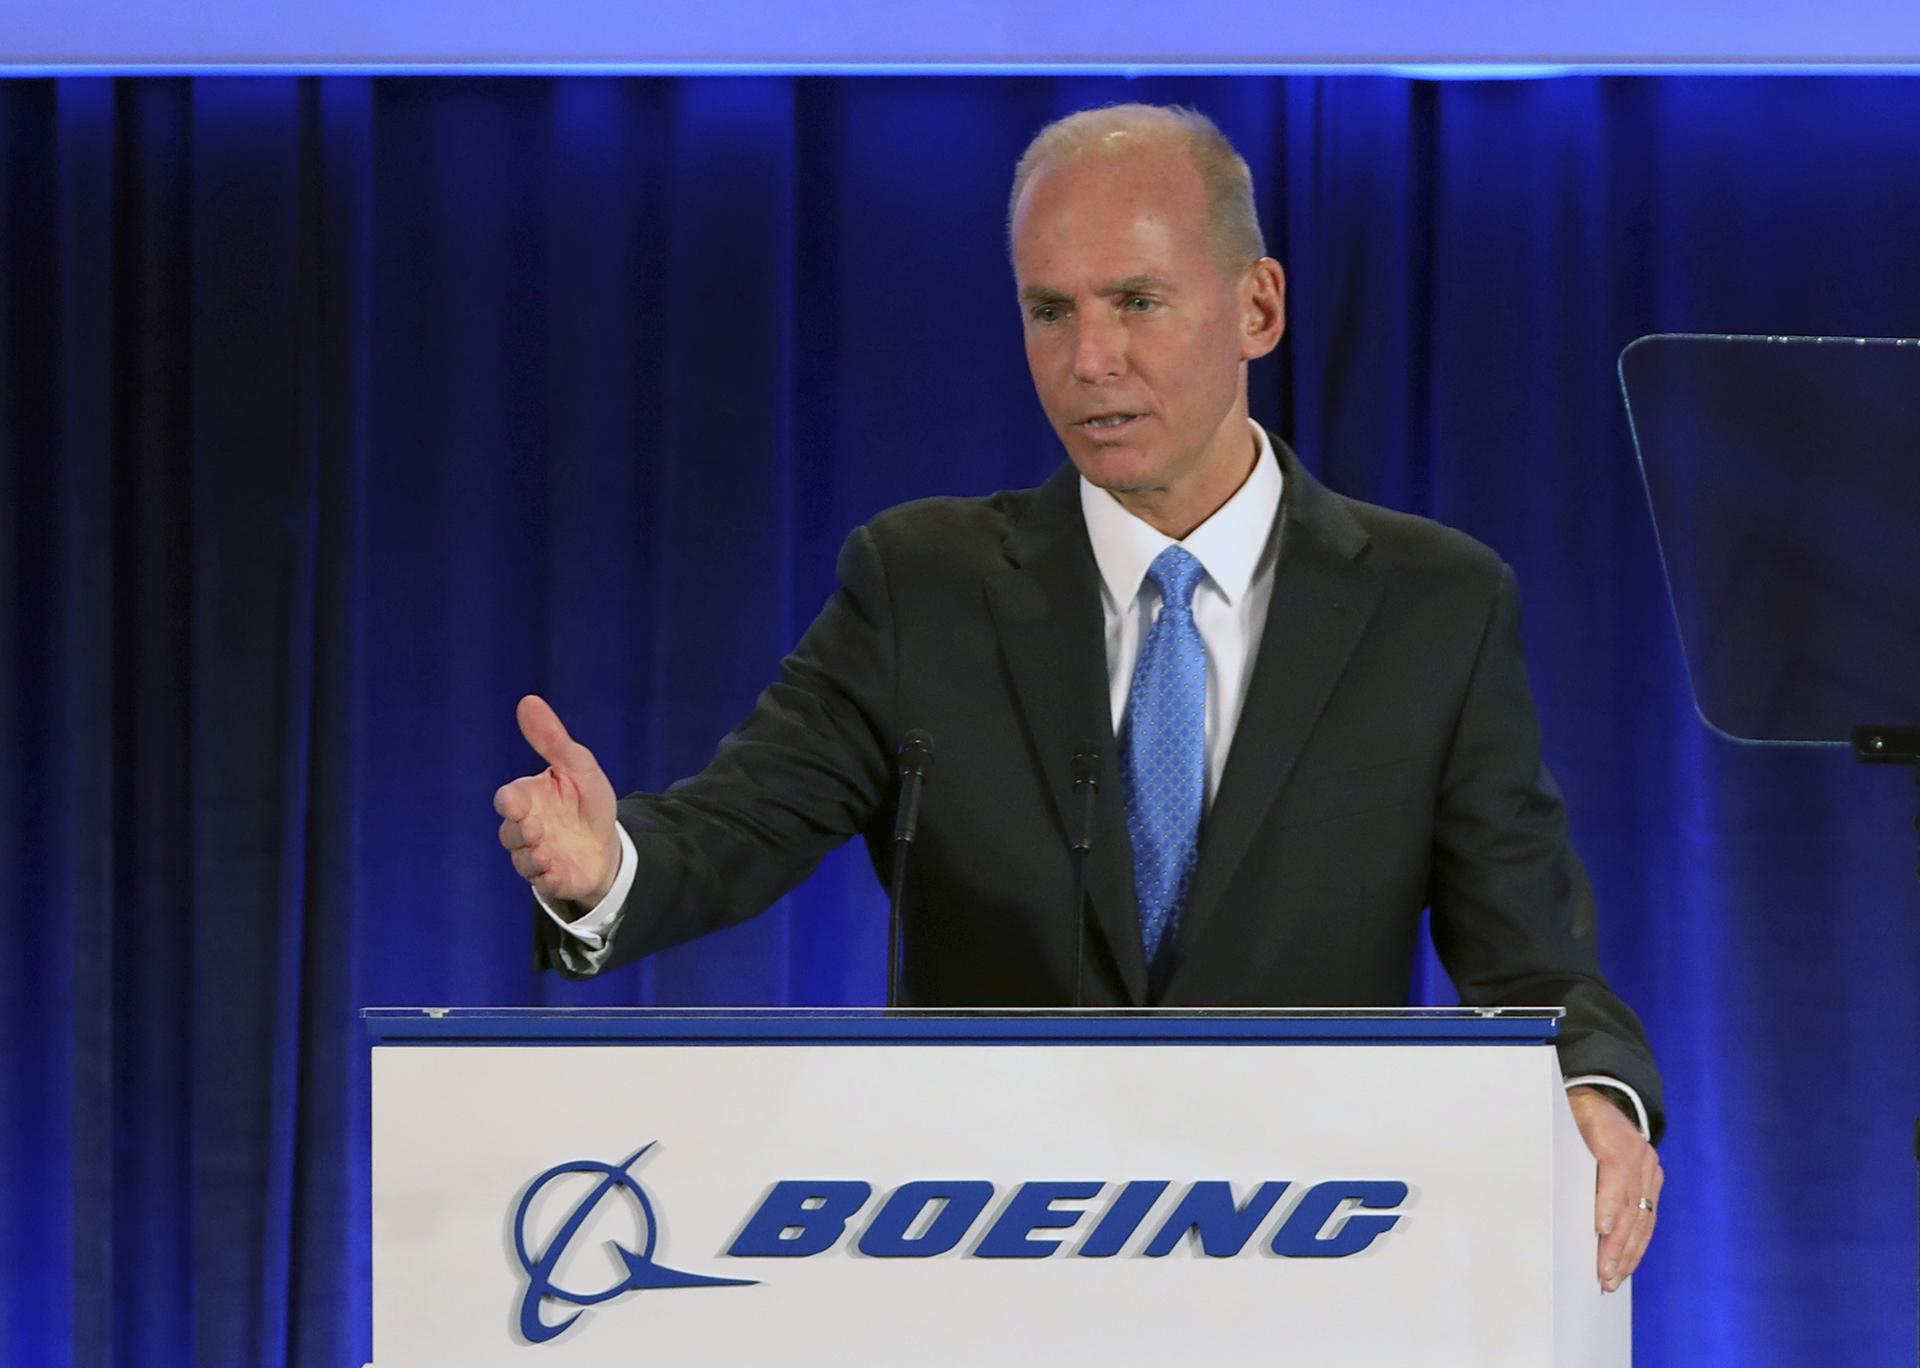 Boeing Chief Executive Officer Dennis Muilenburg speaks Monday, April 29, 2019 at the Boeing Annual General Meeting in Chicago. (John Gress / Reuters via AP, Pool)